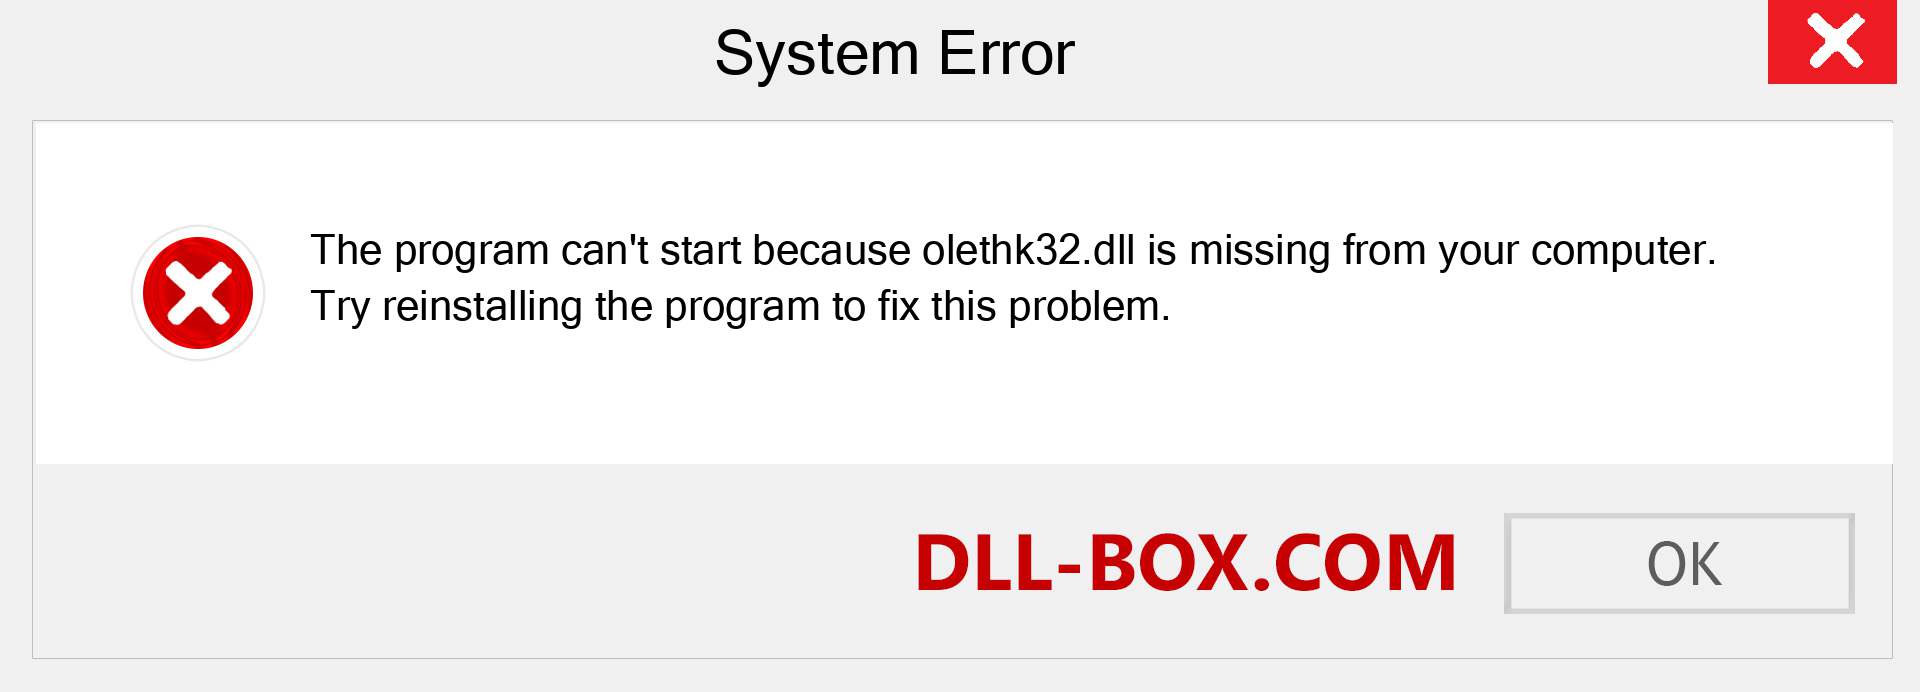  olethk32.dll file is missing?. Download for Windows 7, 8, 10 - Fix  olethk32 dll Missing Error on Windows, photos, images